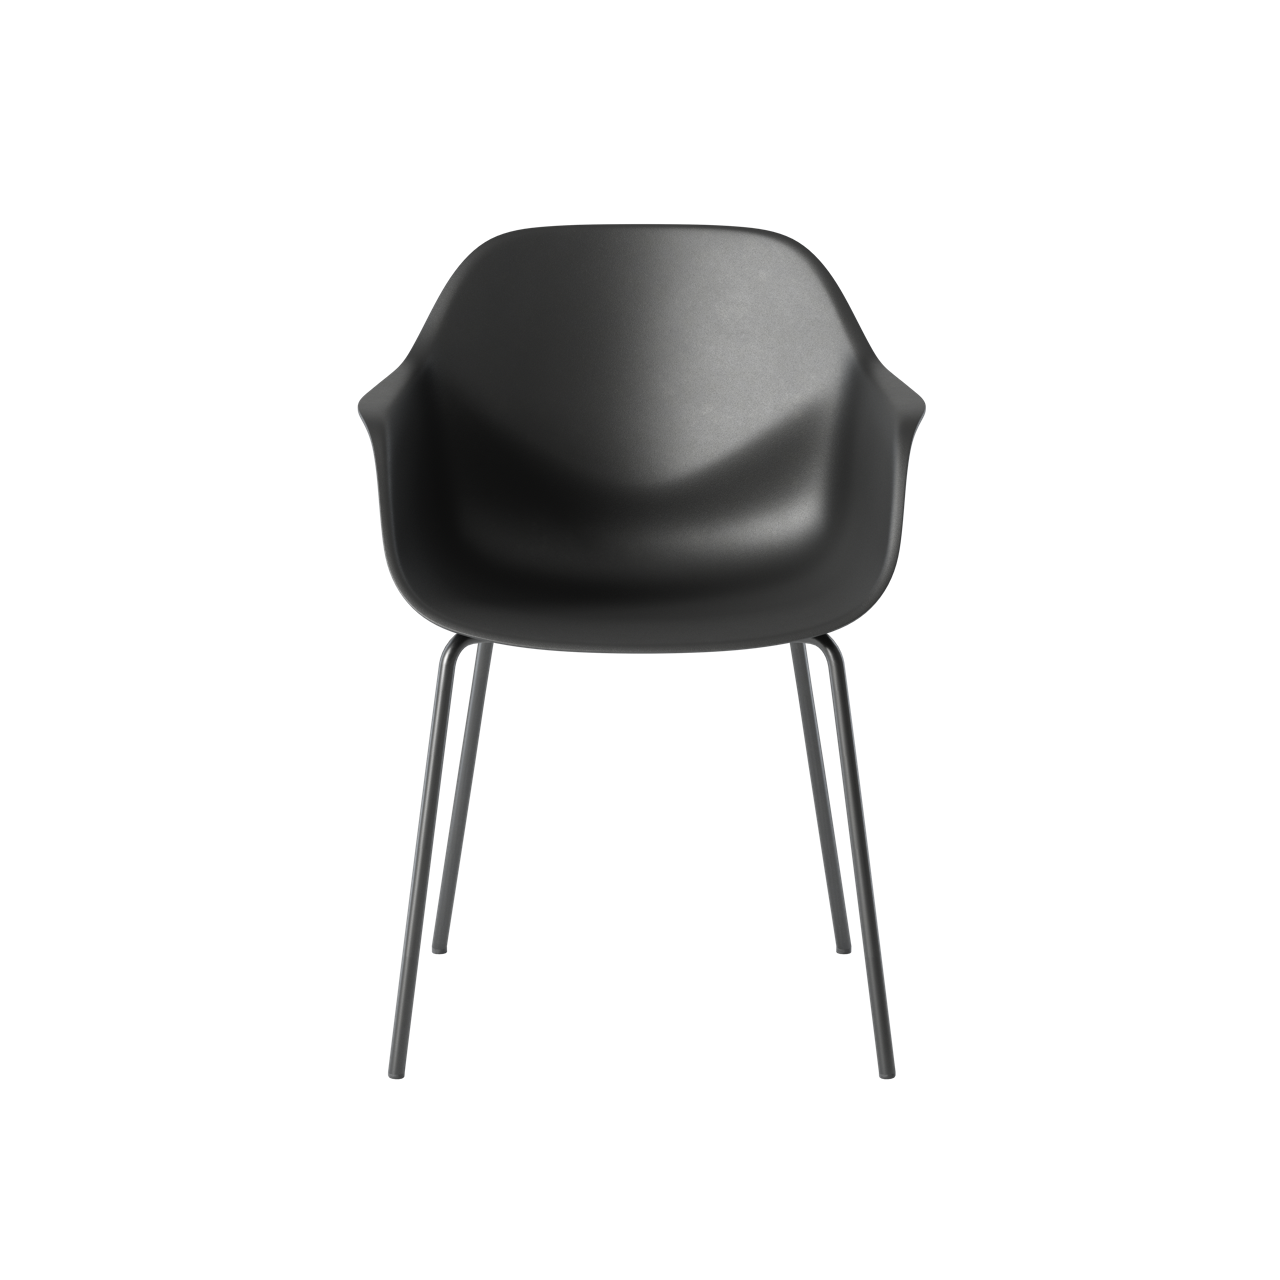 OCEE&FOUR – Chairs – FourMe 44 – Plastic Shell - Packshot Image 4 Large